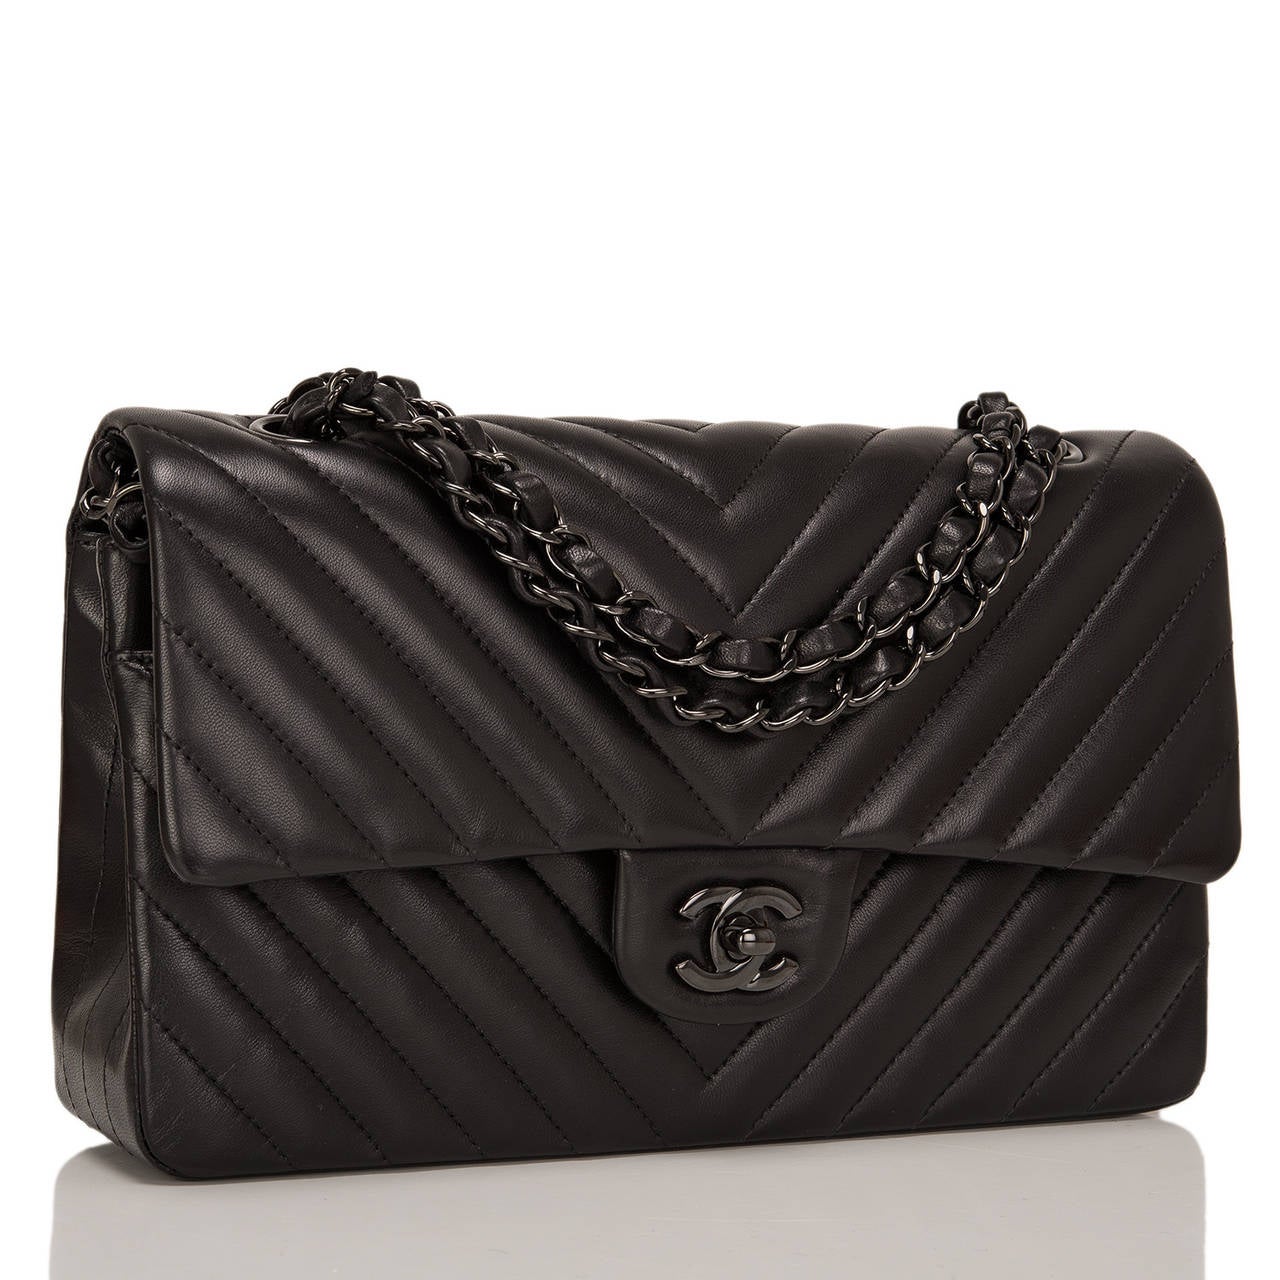 This limited edition Chanel So Black Chevron Large classic double flap bag in black lambskin leather and black metal hardware is an edgy take on the iconic Chanel Classic bag. It features a front flap with signature CC turnlock closure, half moon